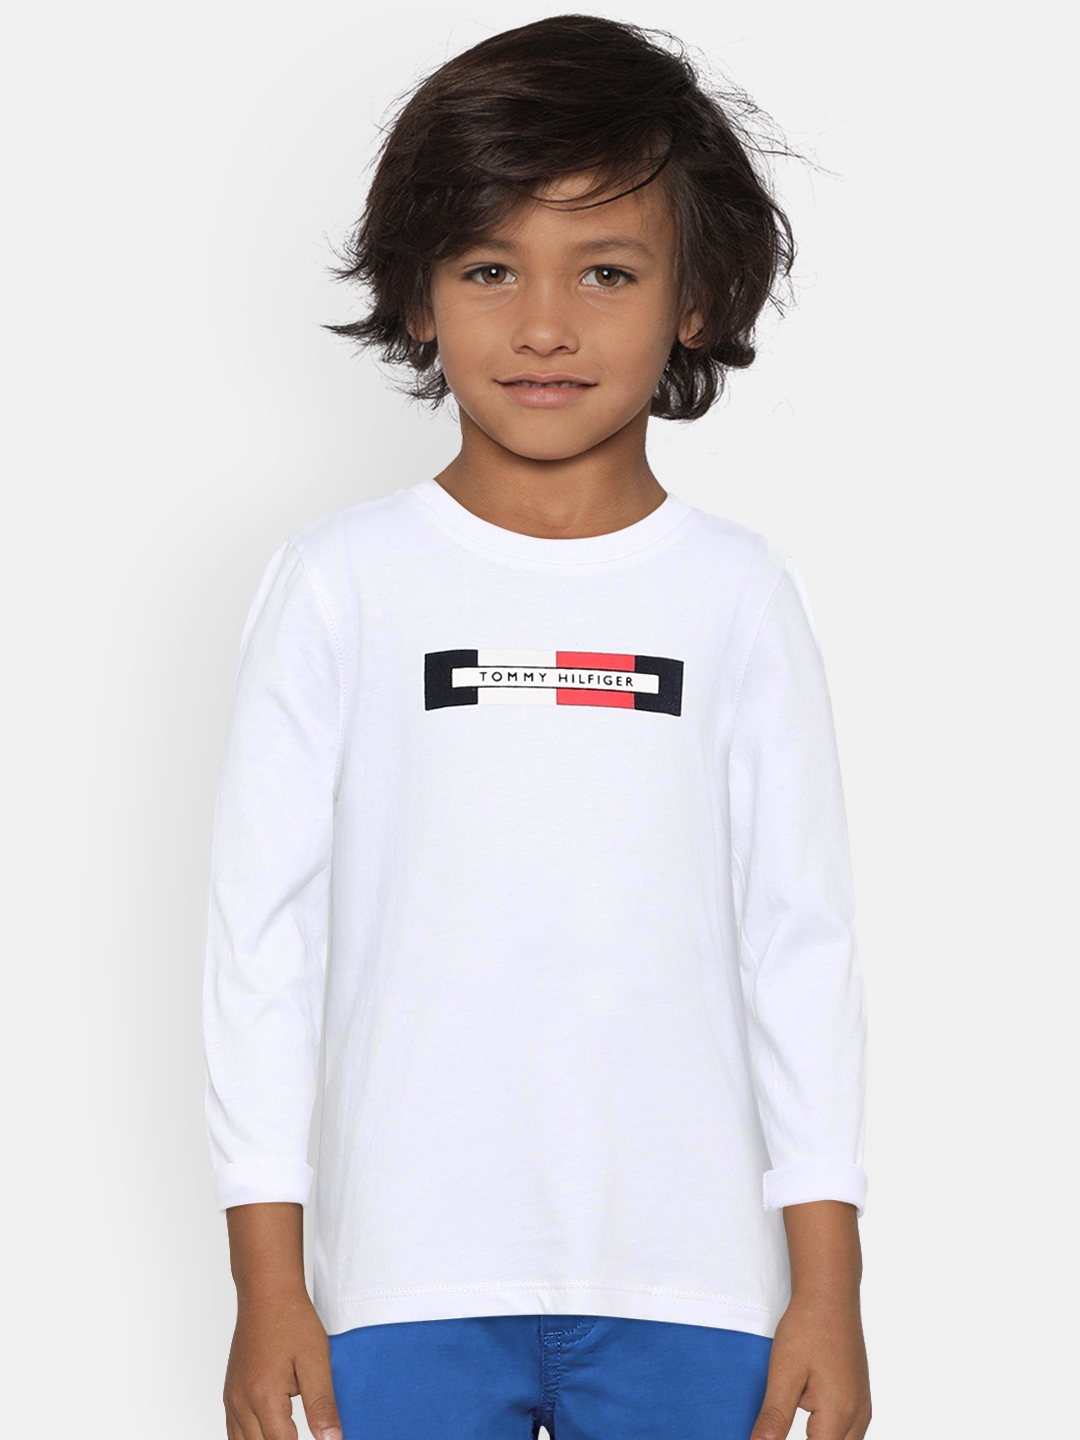 Buy Tommy Hilfiger Boys White Printed Round Neck T Shirt - Tshirts for ...